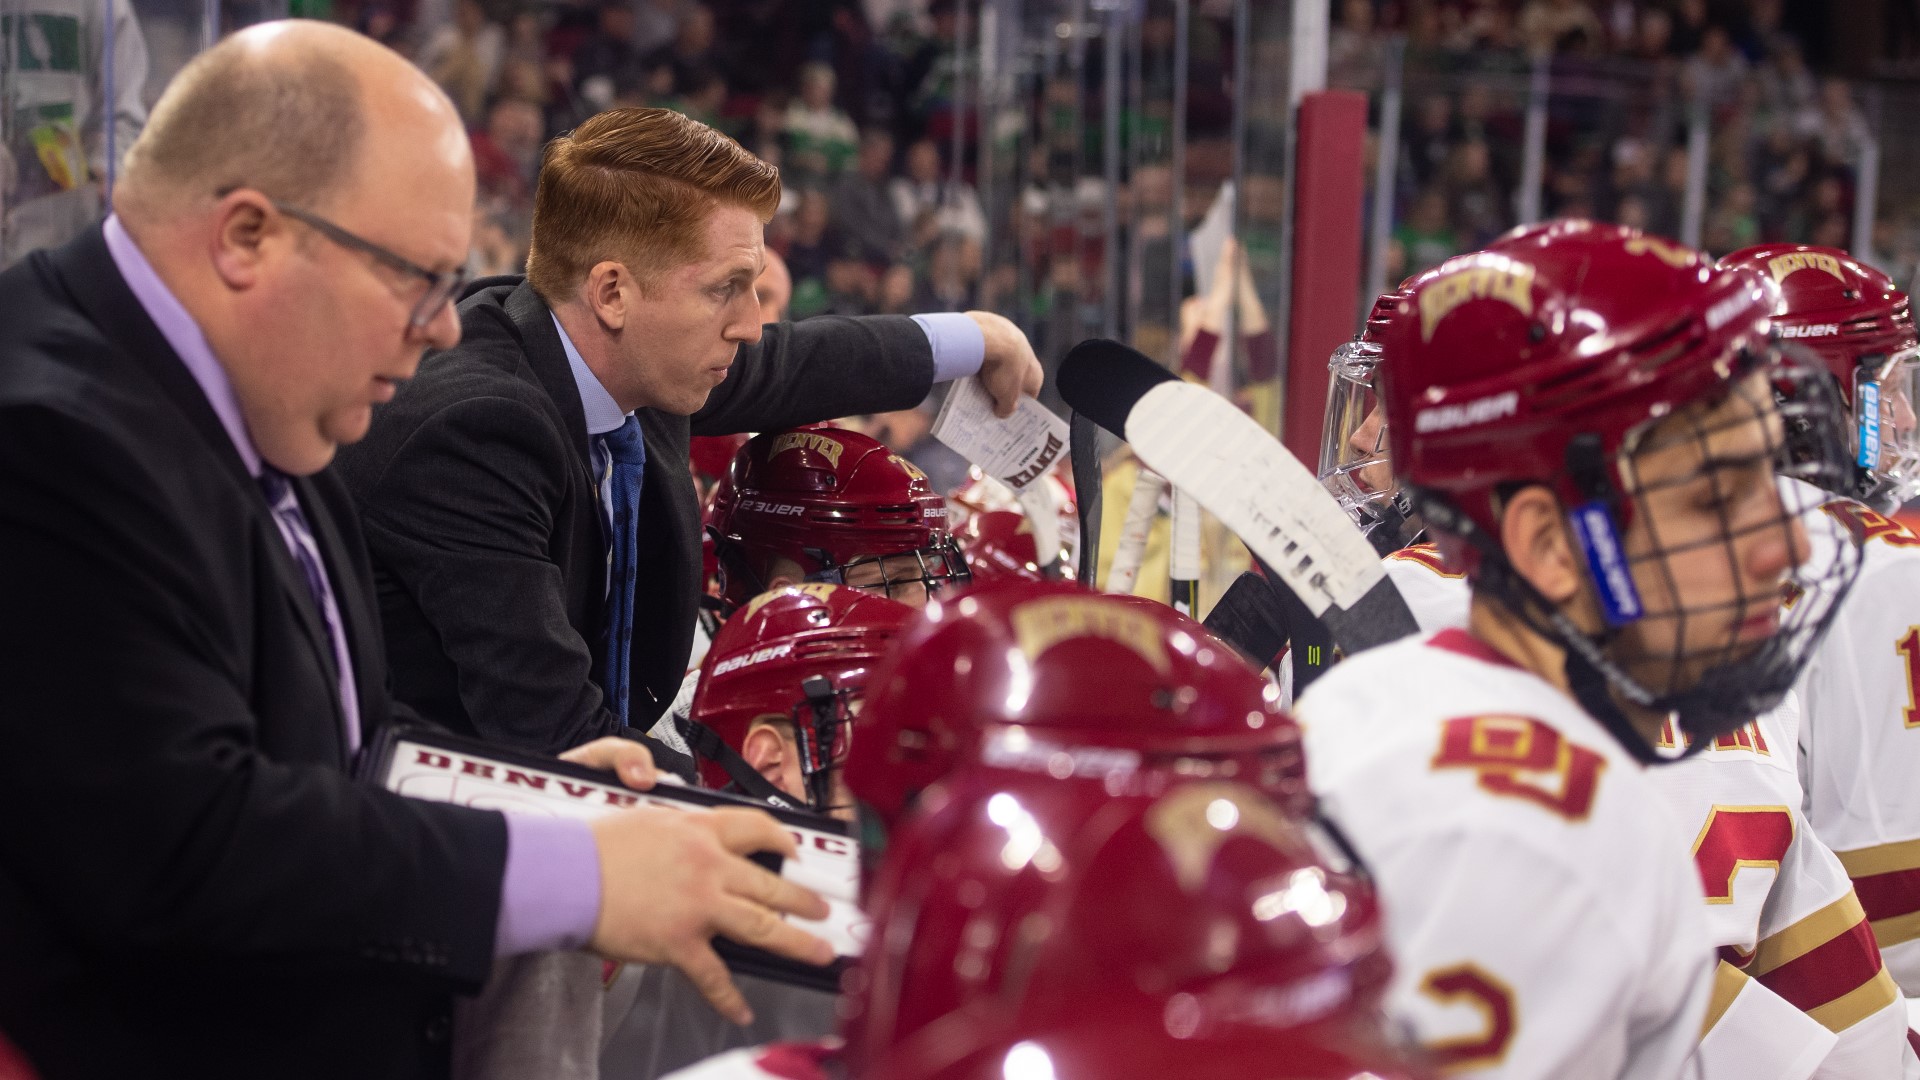 The University of Denver men's hockey team will be playing in its 12th-straight NCAA tournament, the longest active streak in college hockey.